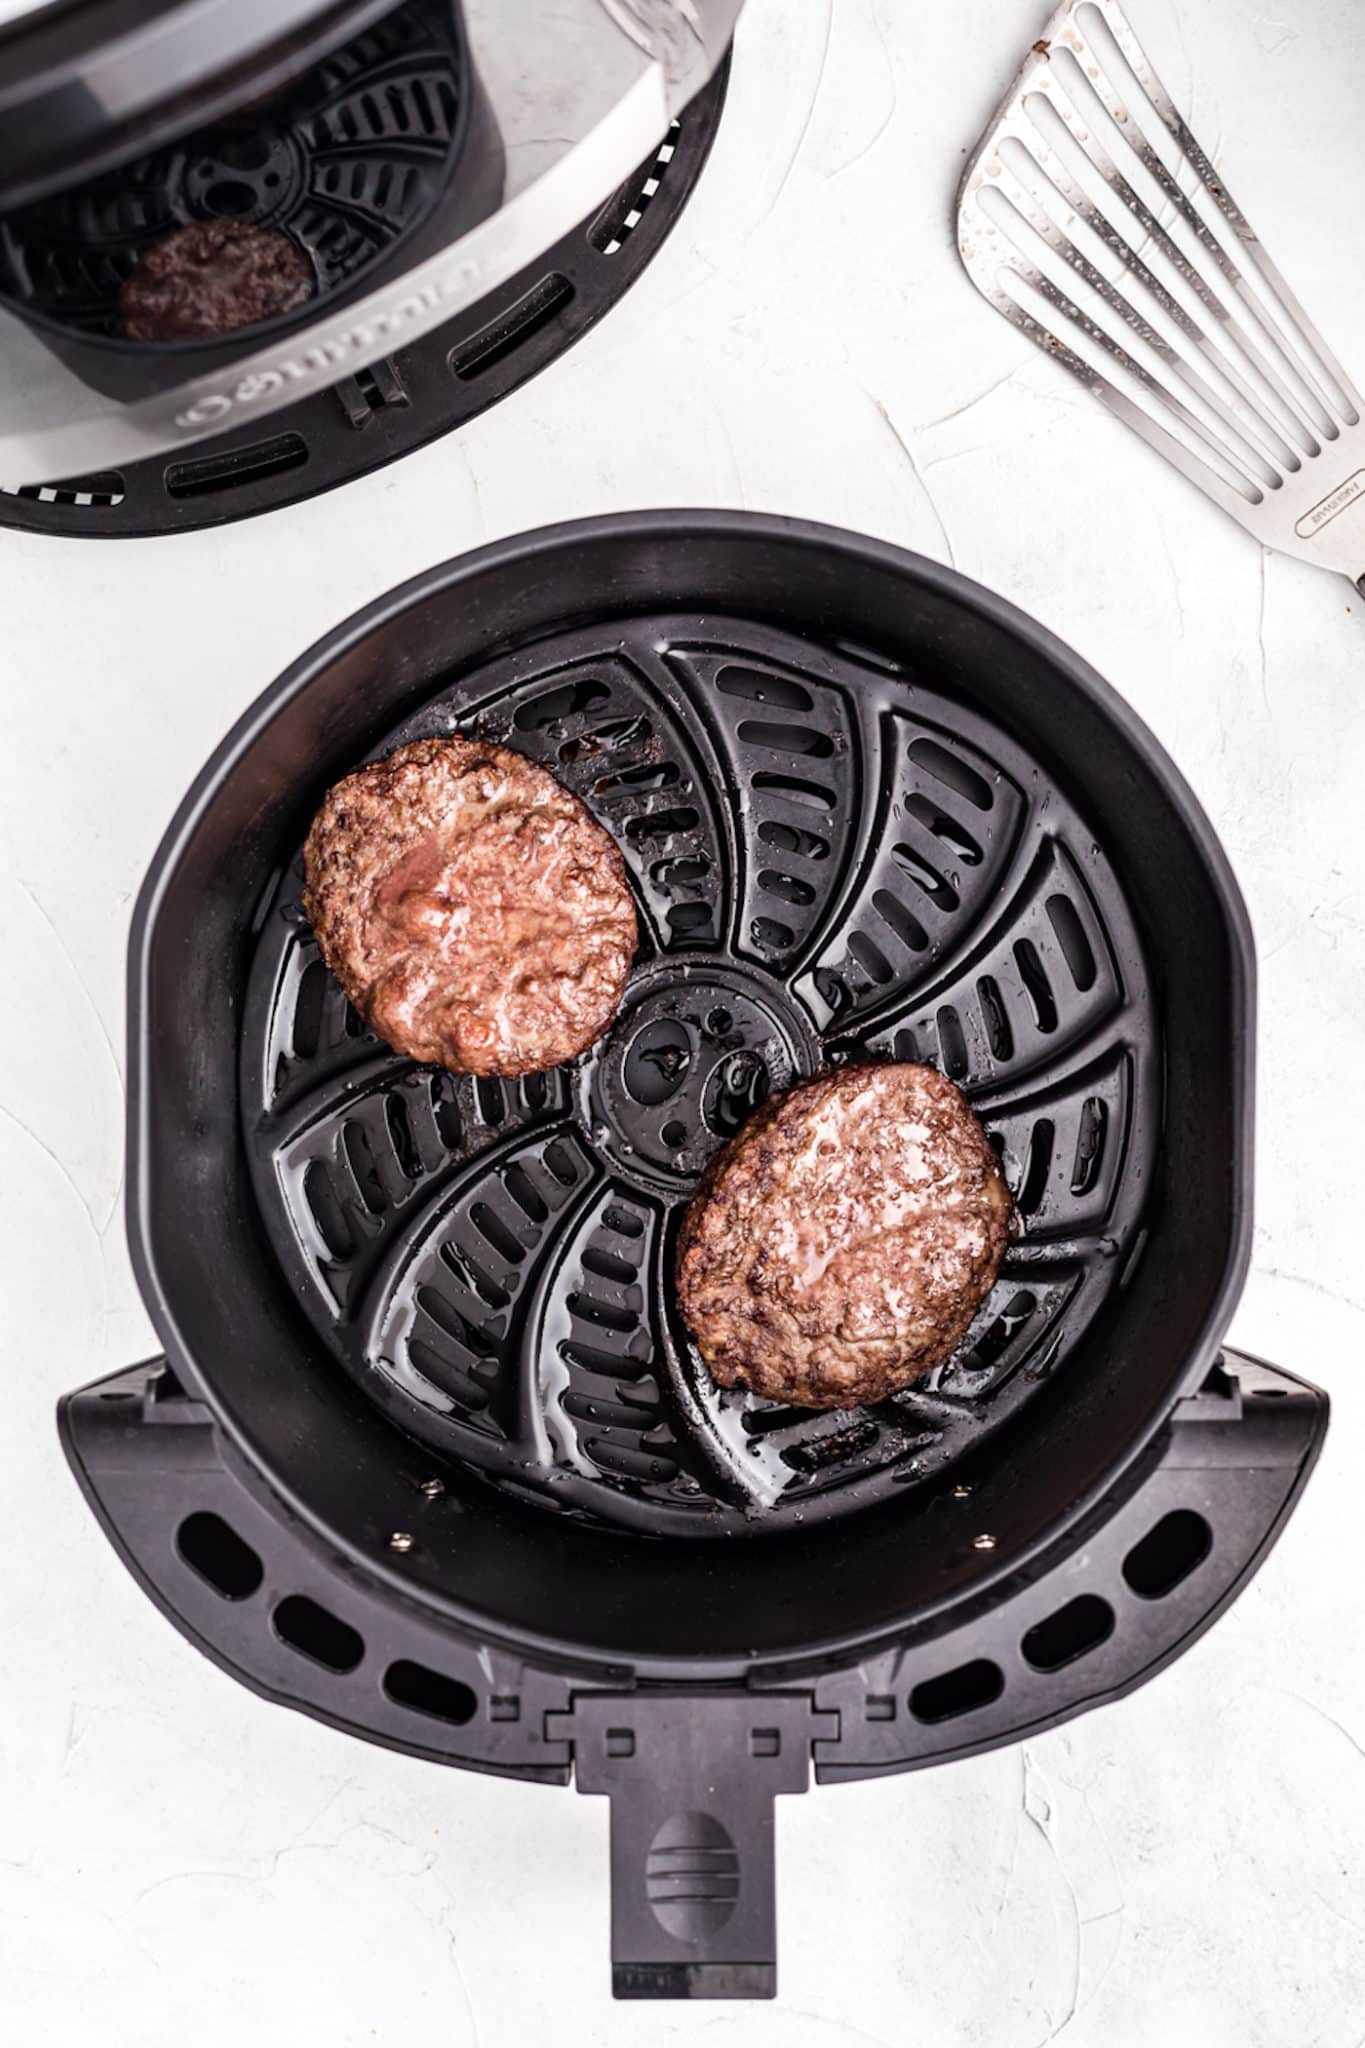 cooked hamburgers in an air fryer.